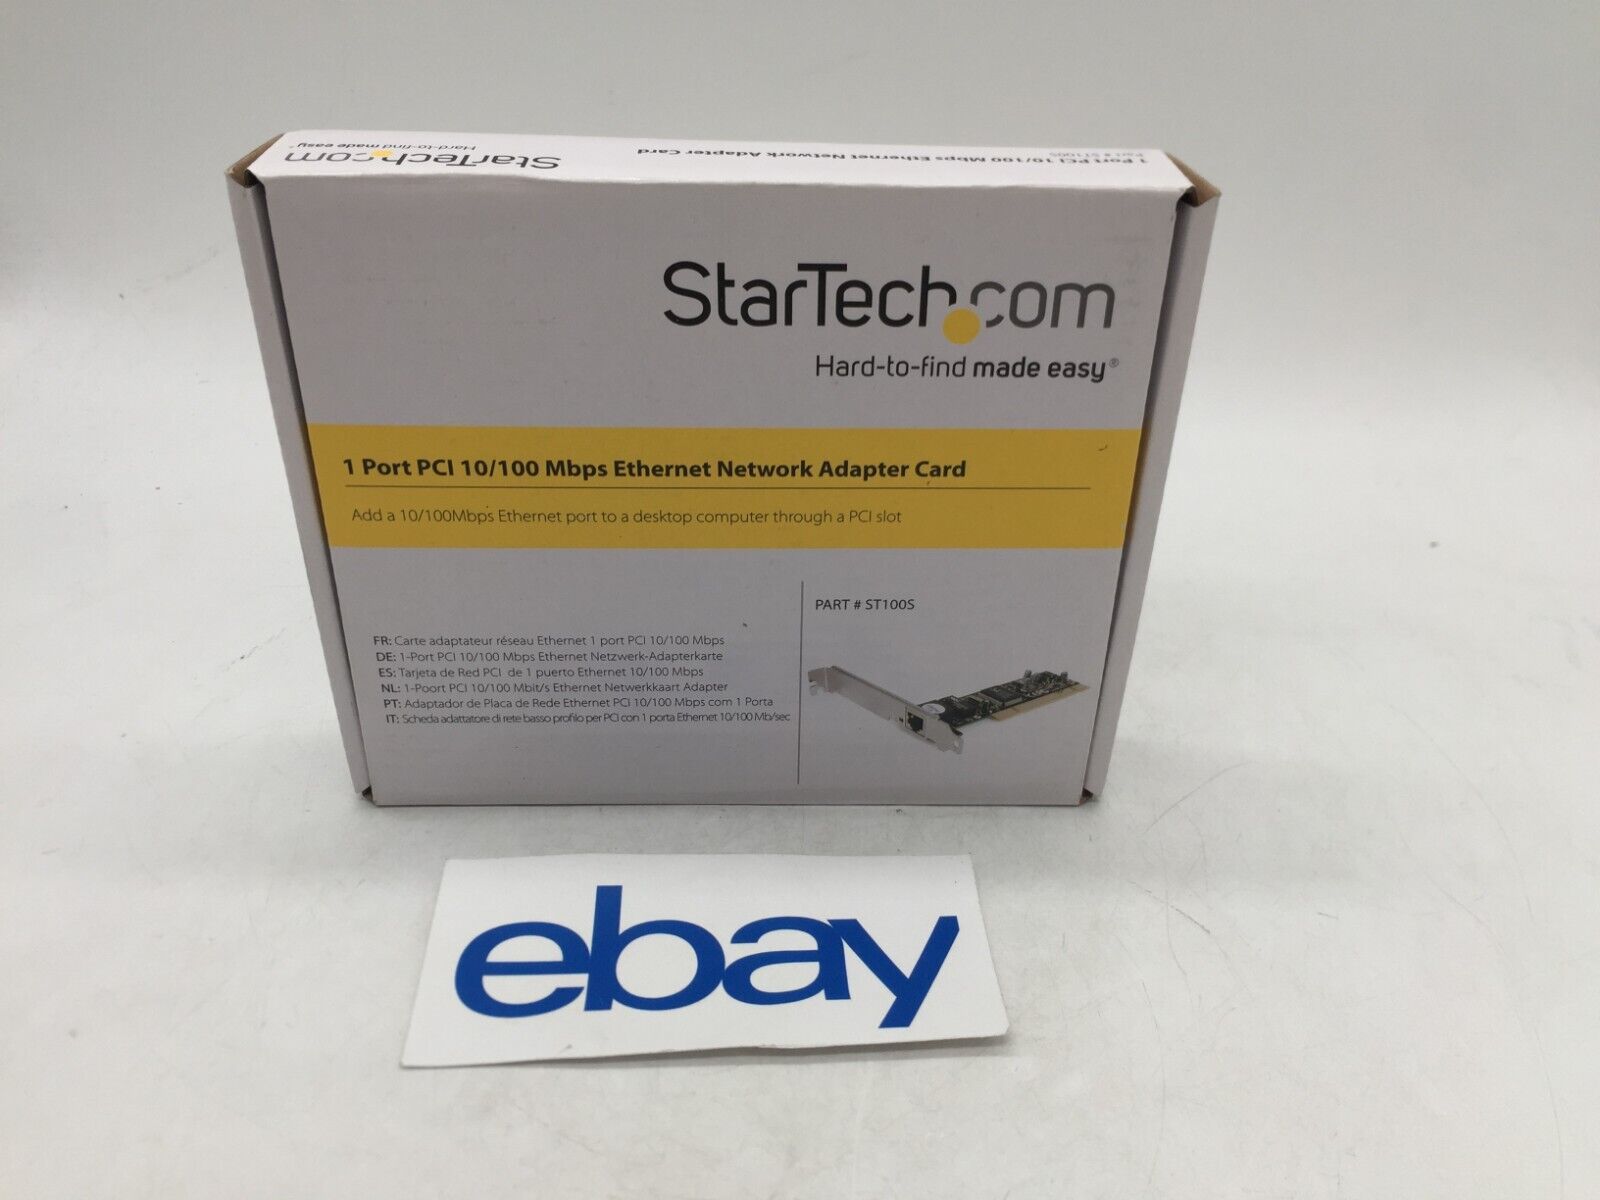 STARTECH ST100S 1 PORT PCI 10/100 MBPS ETHERNET NETWORK ADAPTER CARD FREE S/H